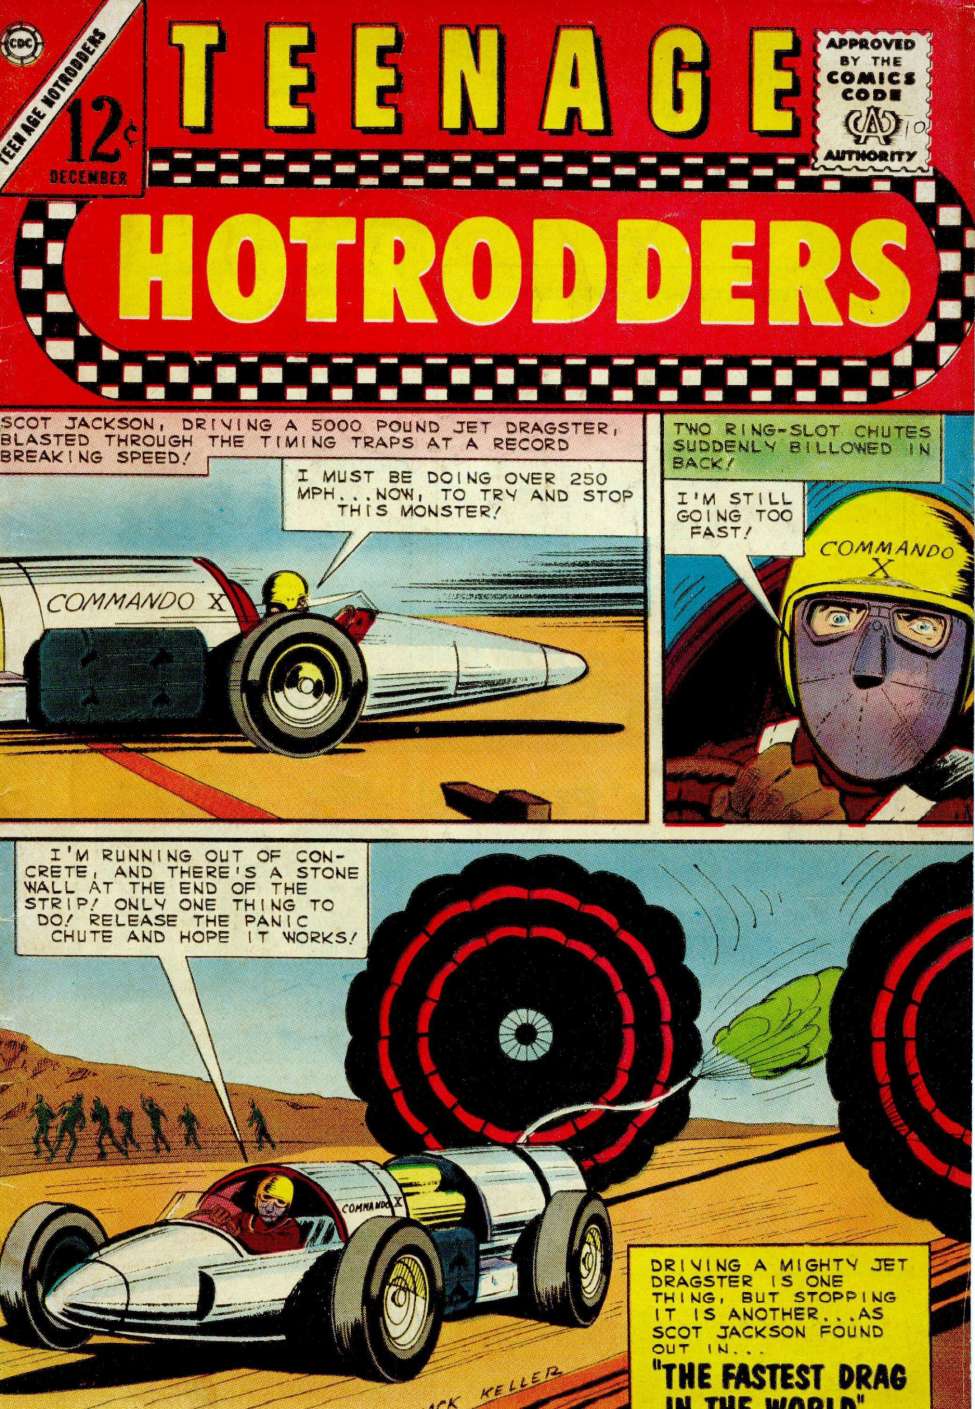 Comic Book Cover For Teenage Hotrodders 10